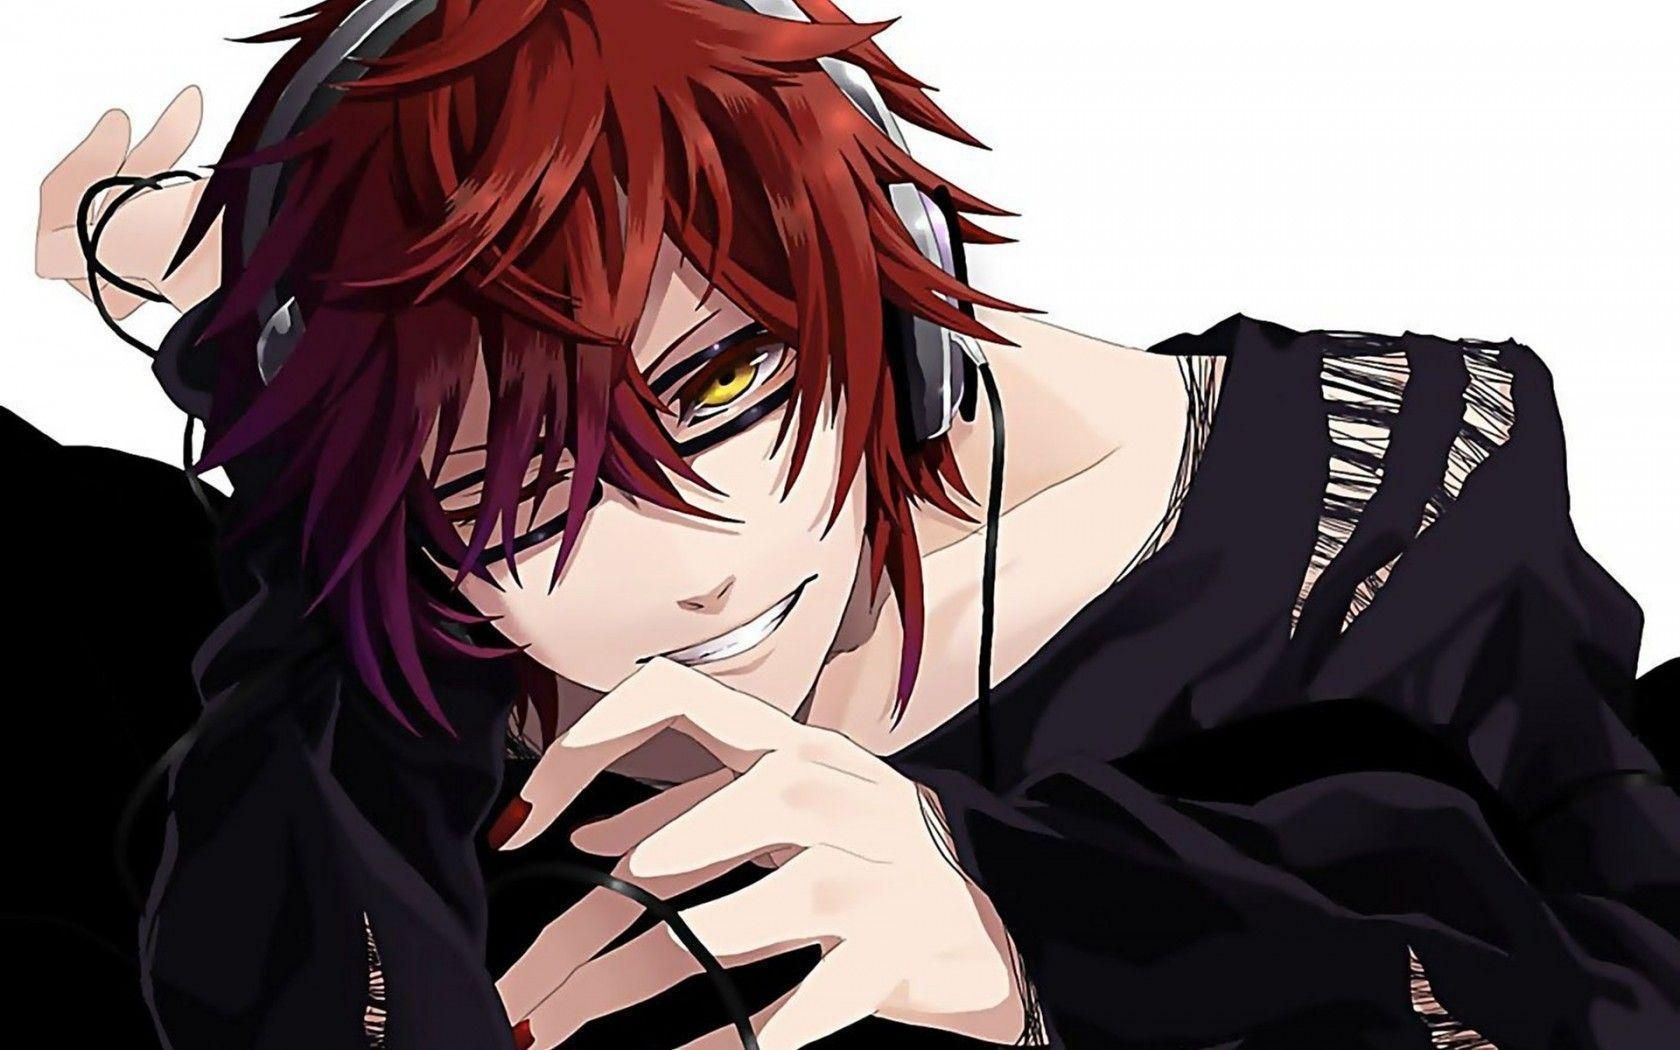 grell sutcli without glasses Image Search Results. Red hair anime guy, Cute anime boy, Anime guys with glasses